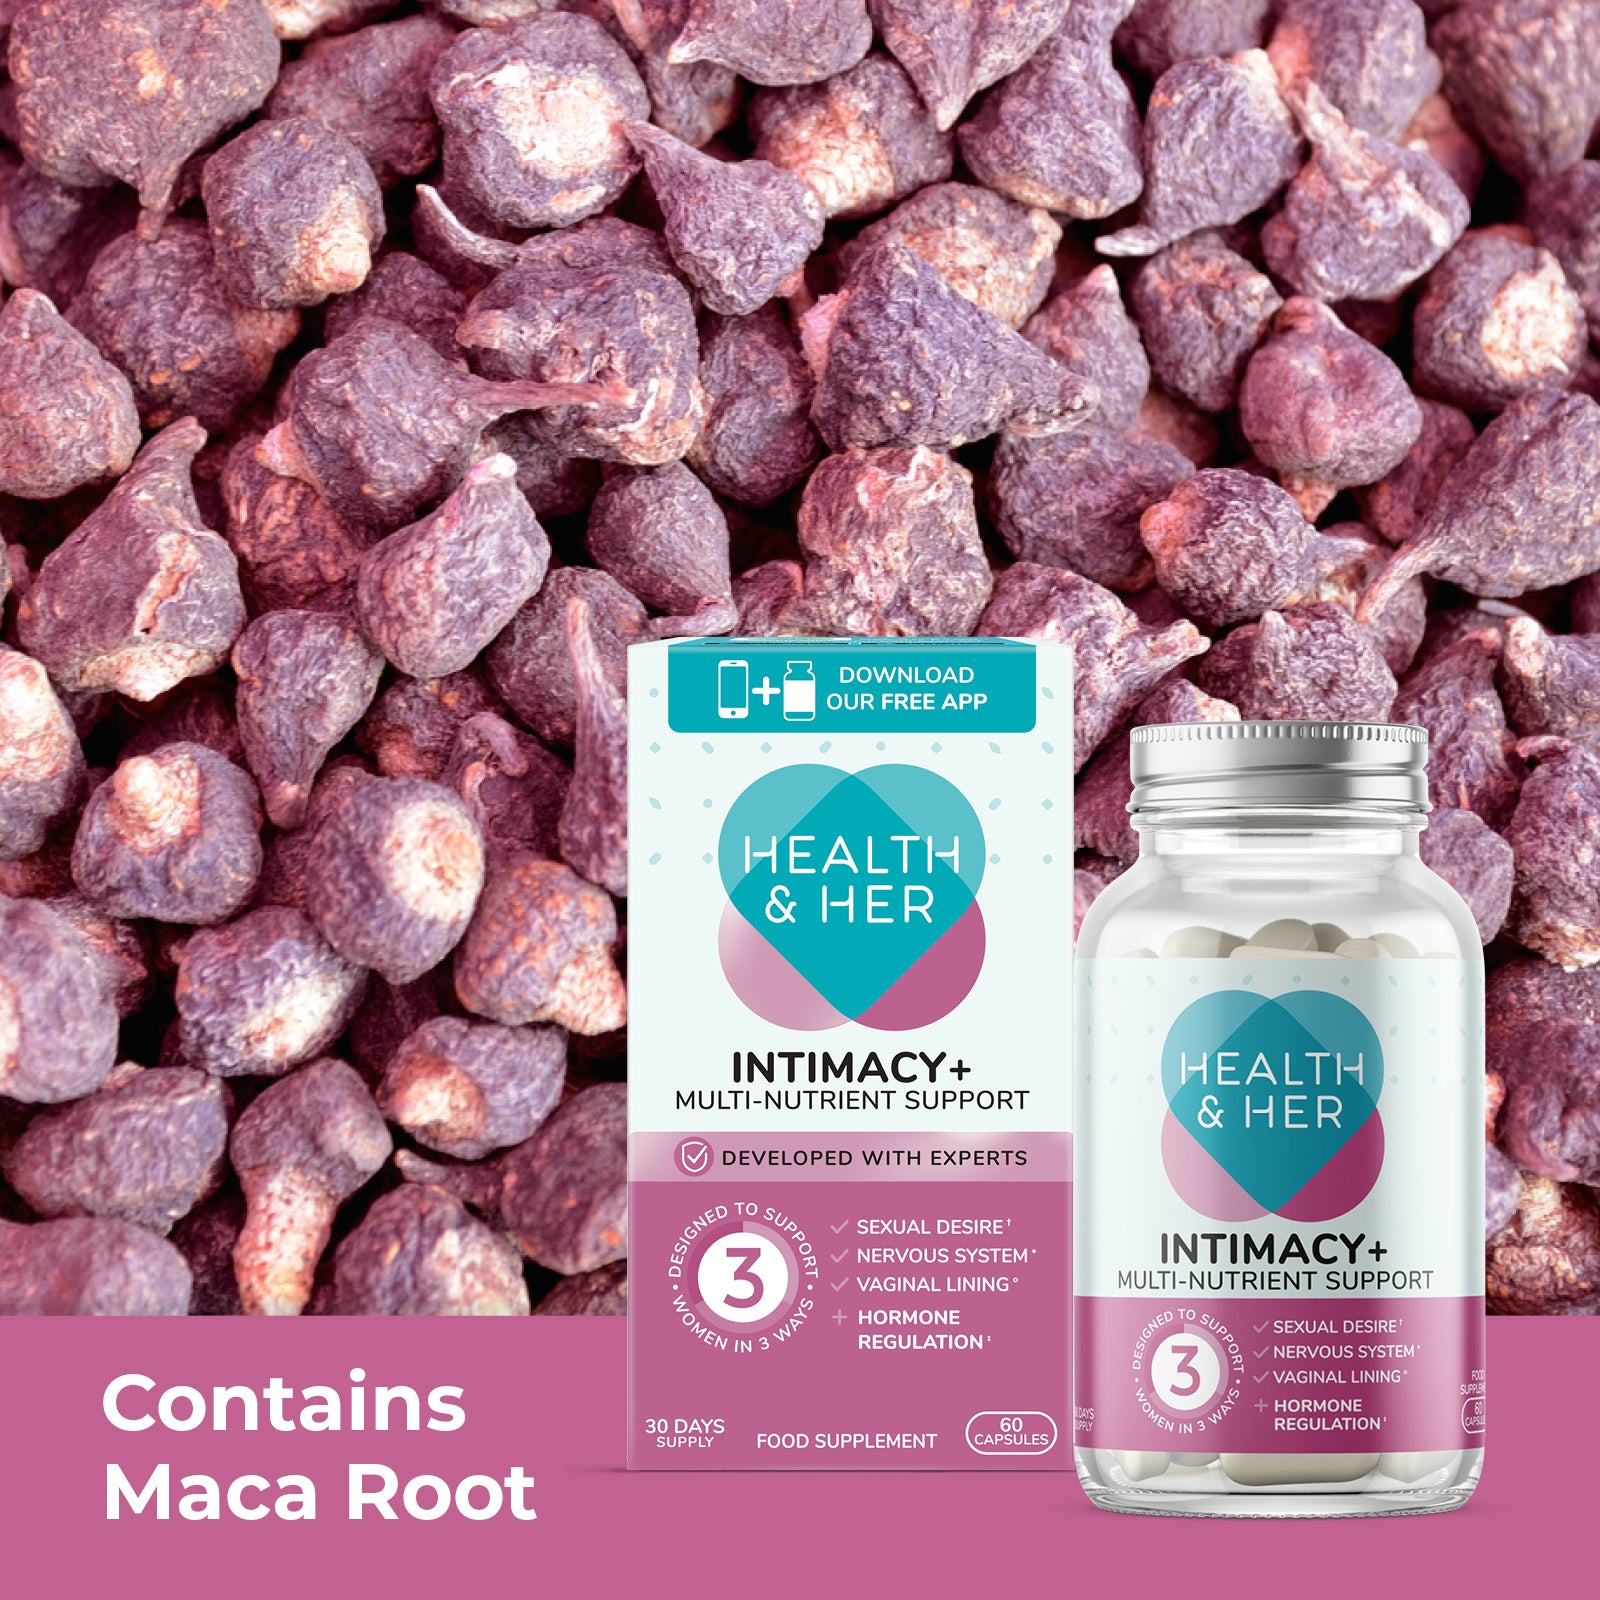 Health & Her Intimacy+ Multi-Nutrient Support Health & Her